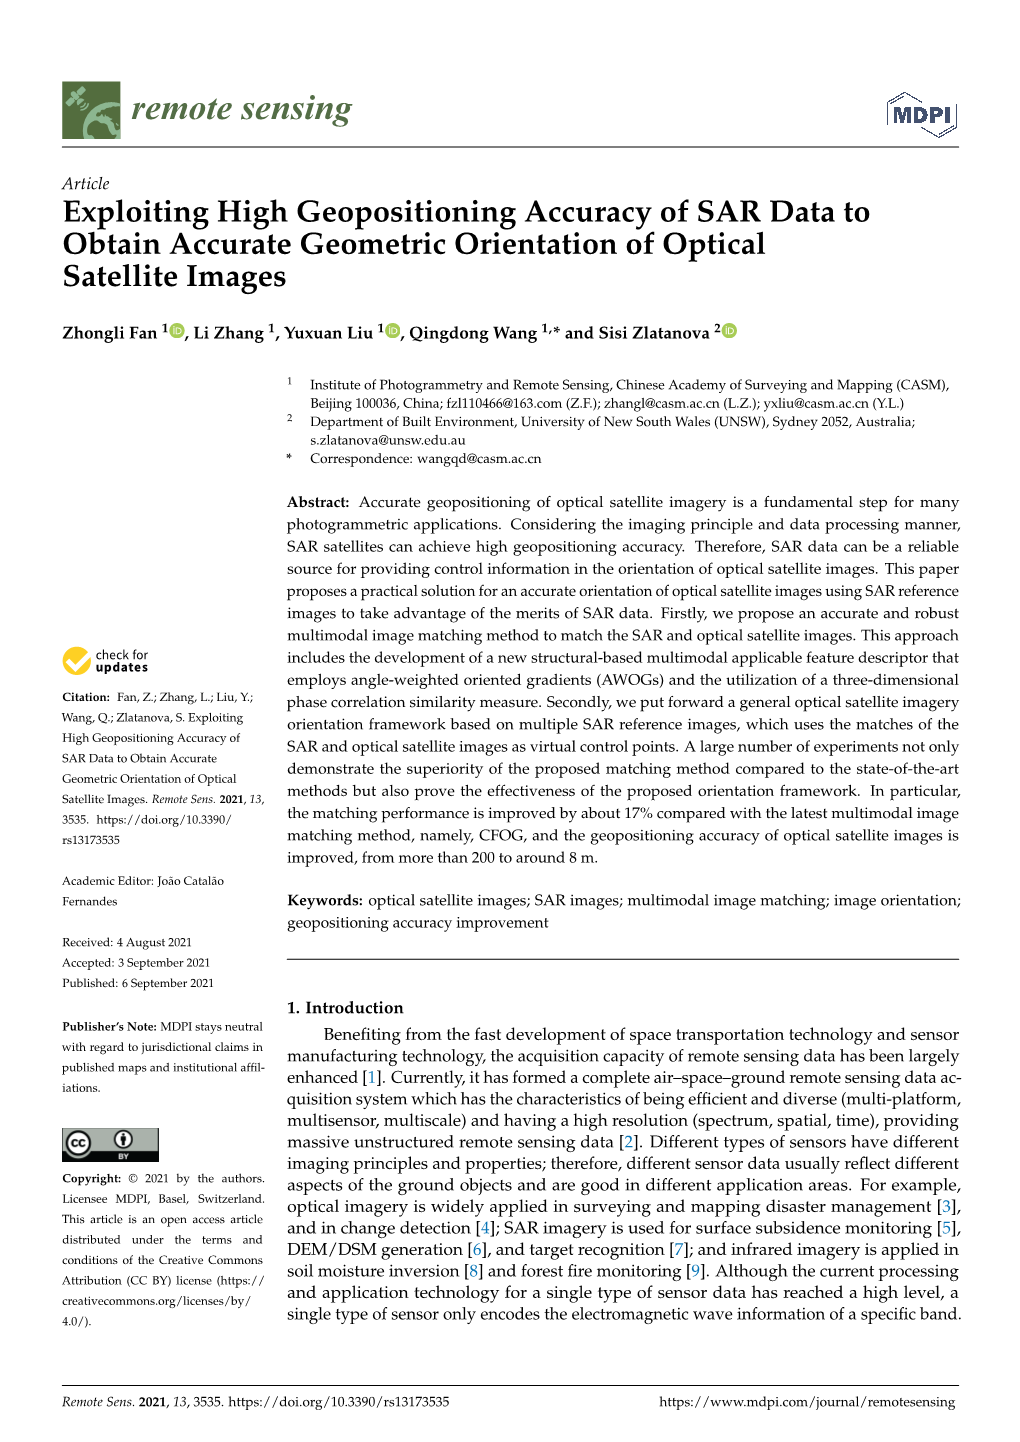 Exploiting High Geopositioning Accuracy of SAR Data to Obtain Accurate Geometric Orientation of Optical Satellite Images